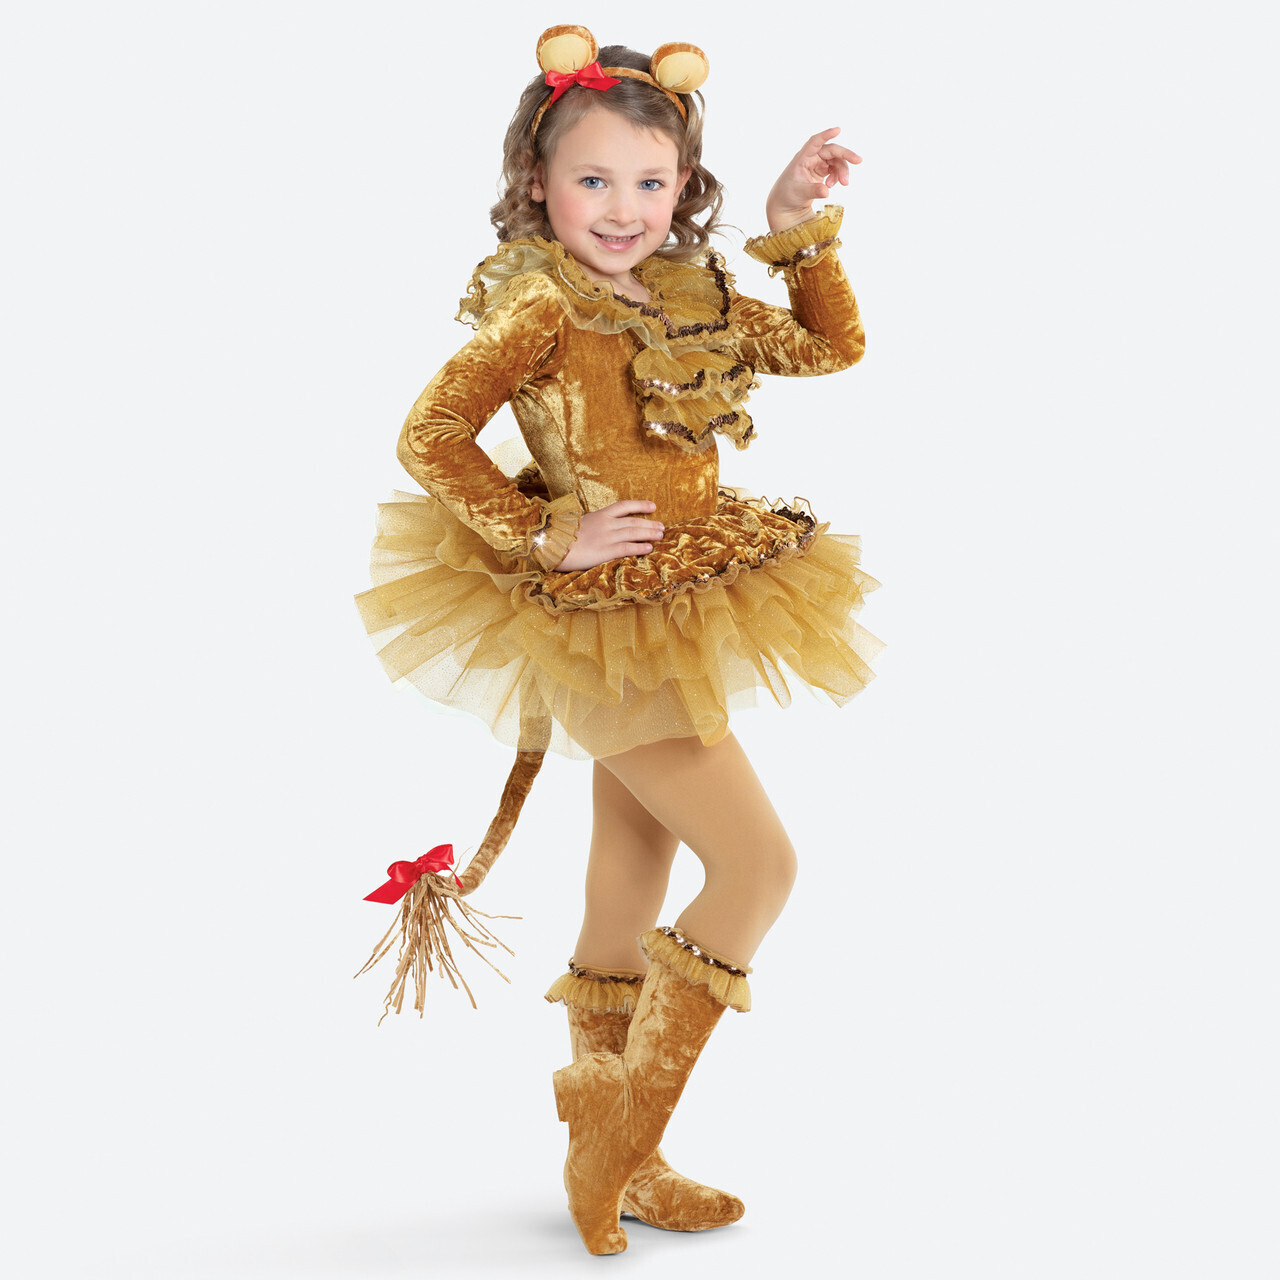 COSTUME: Wednesday • 10:00am •Bethany• Fancy Toes • Ballet/Tap